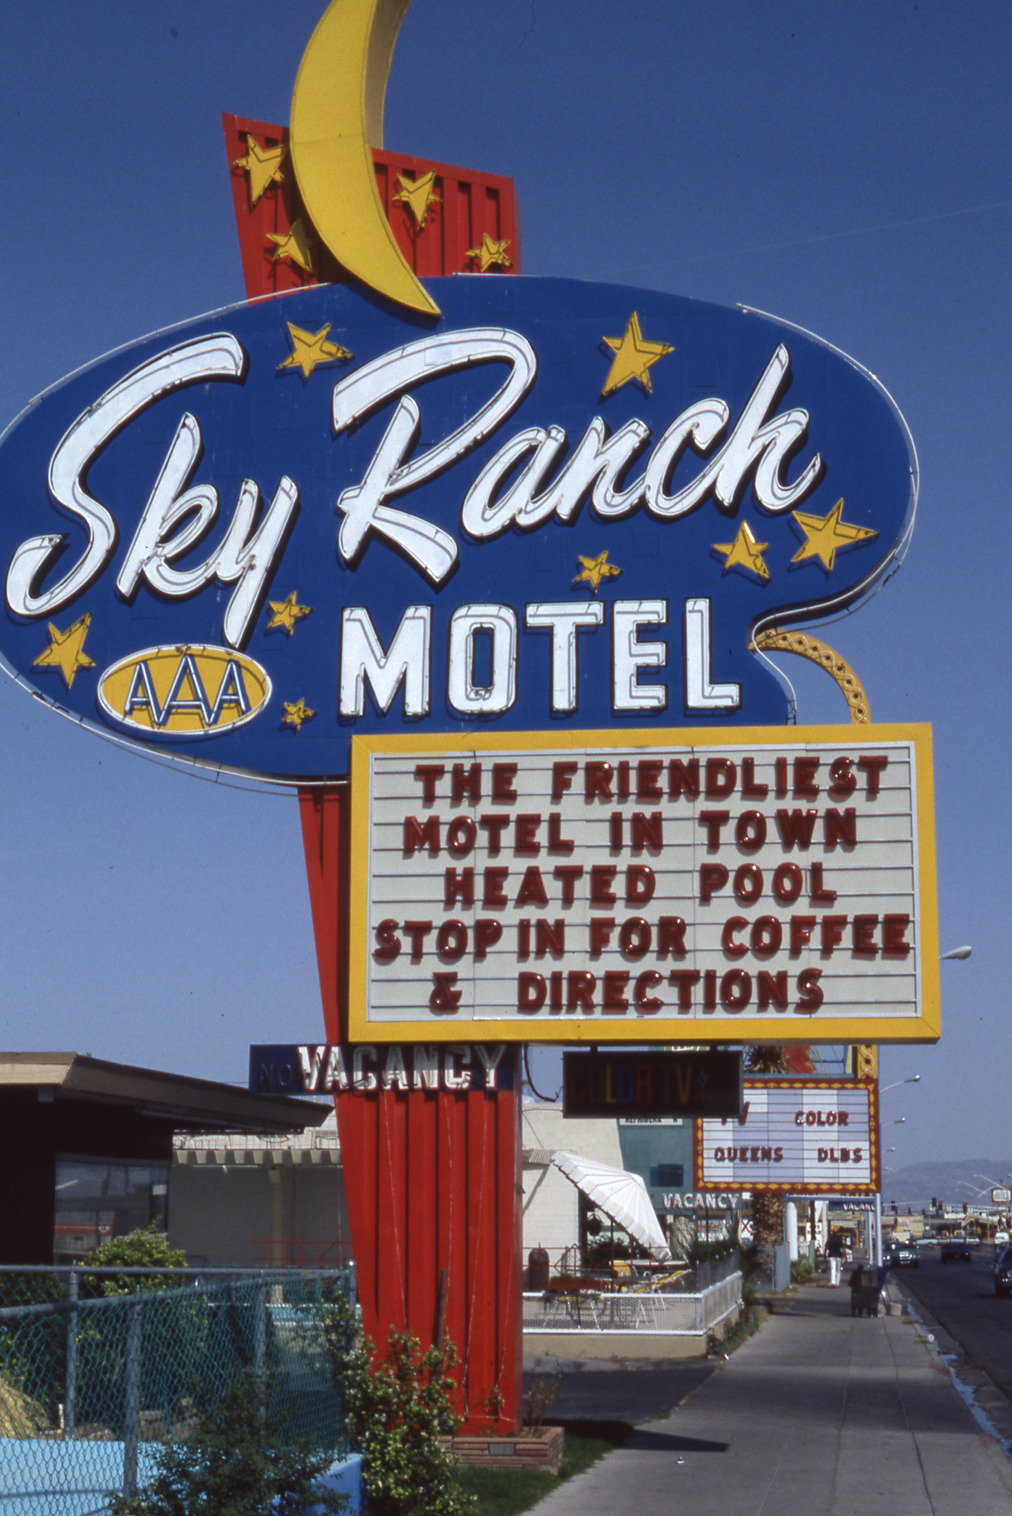 Sky Ranch Motel flag mounted pylon and marquee signs, Las Vegas, Nevada: photographic print